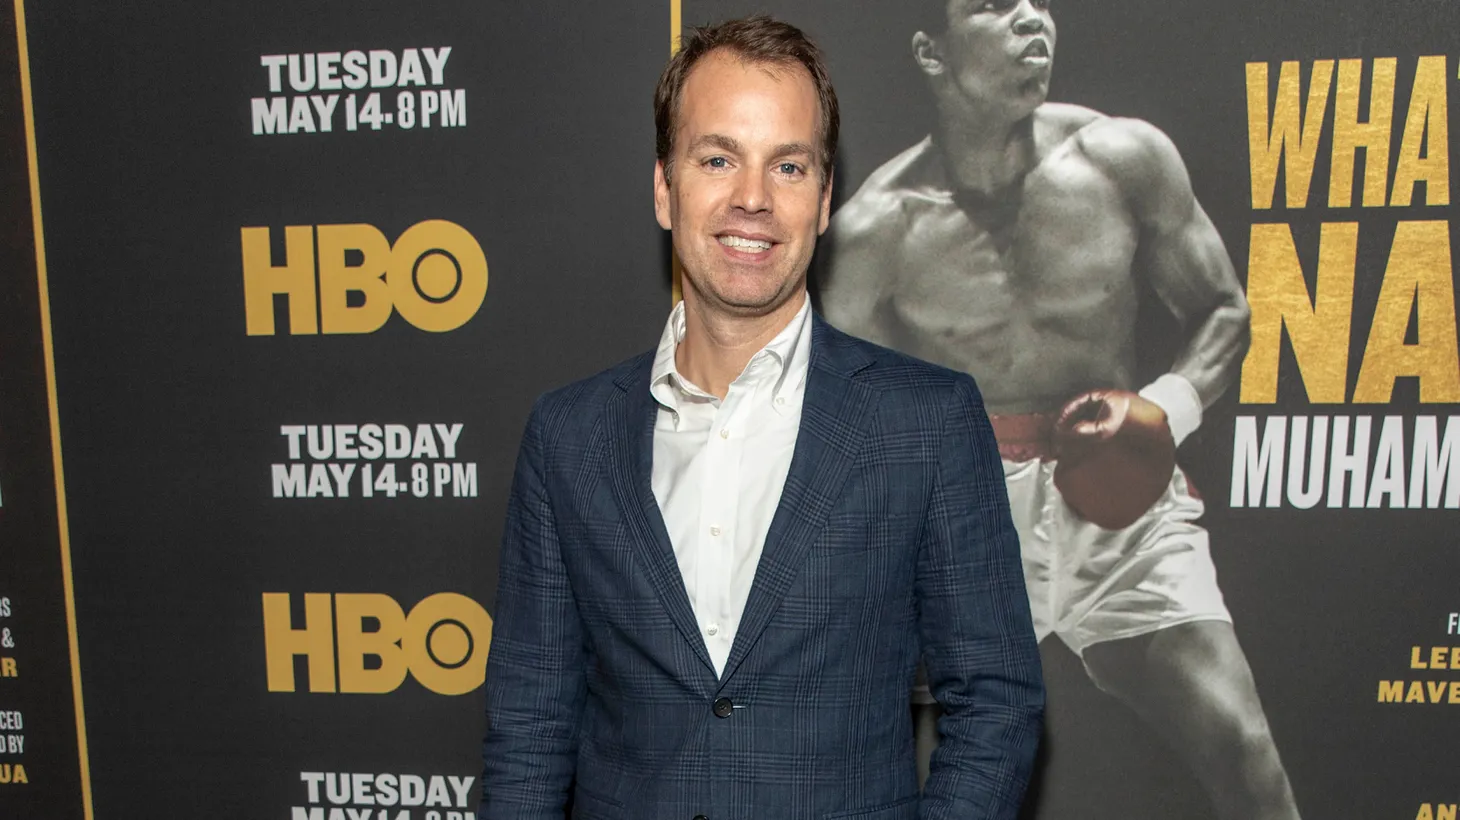 HBO CEO Casey Bloys attends the premiere of "What's My Name: Muhammad Ali" documentary at the Regal Cinemas LA LIVE 14 in Los Angeles on May 8, 2019.